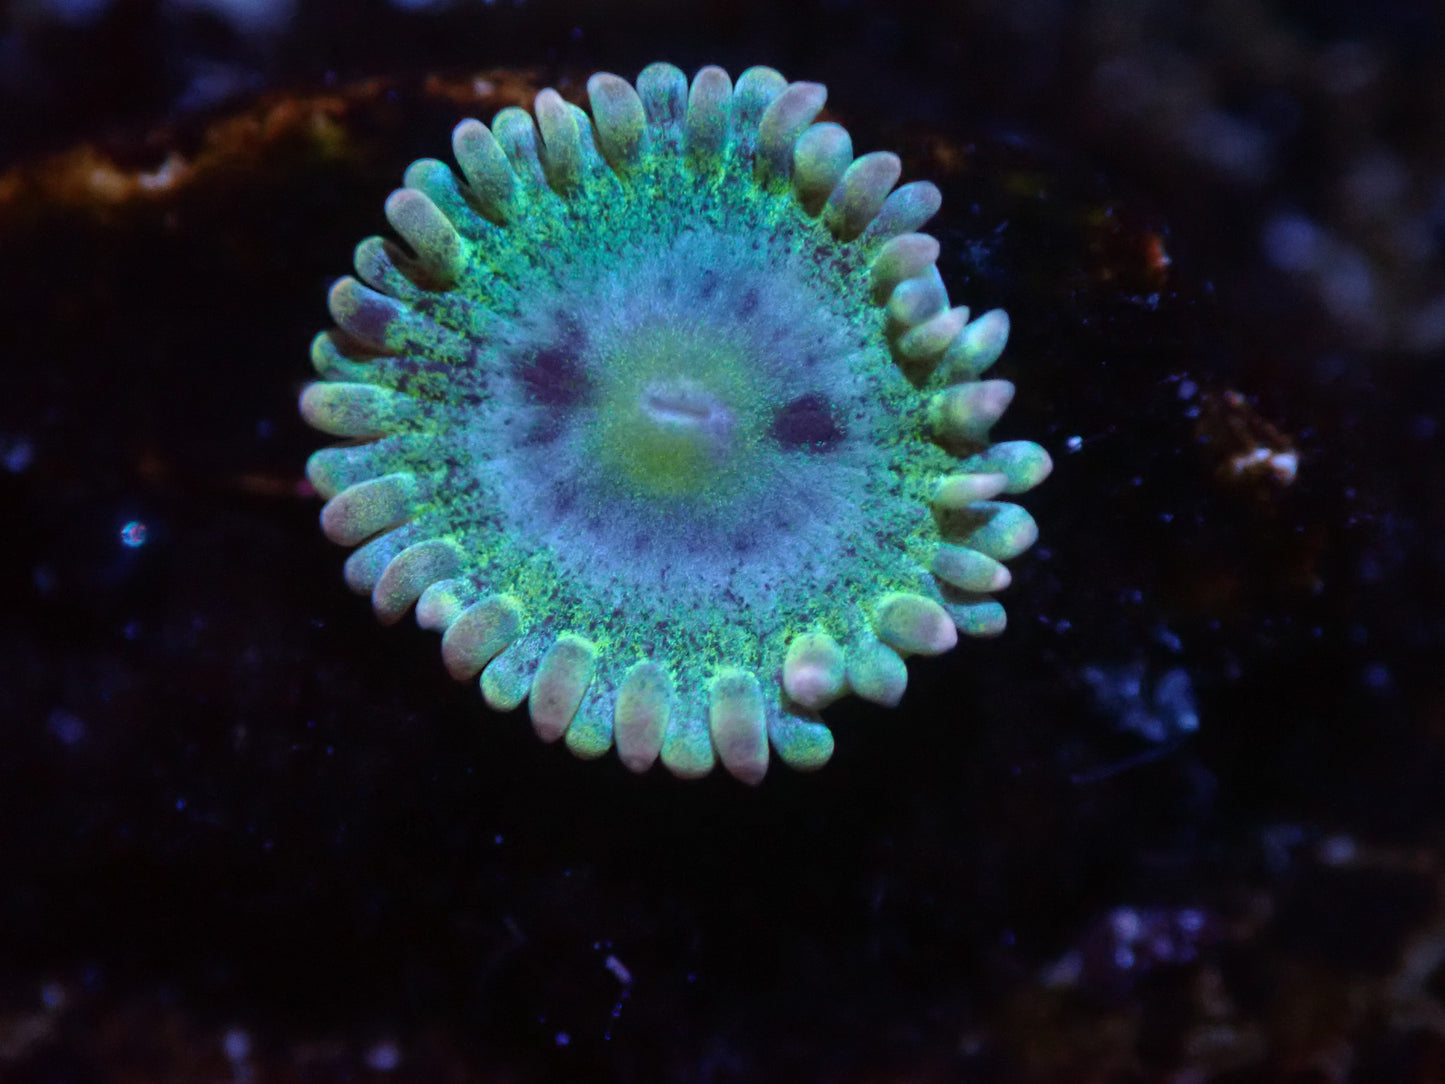 Unkown Zoa Auction 8/4 ended